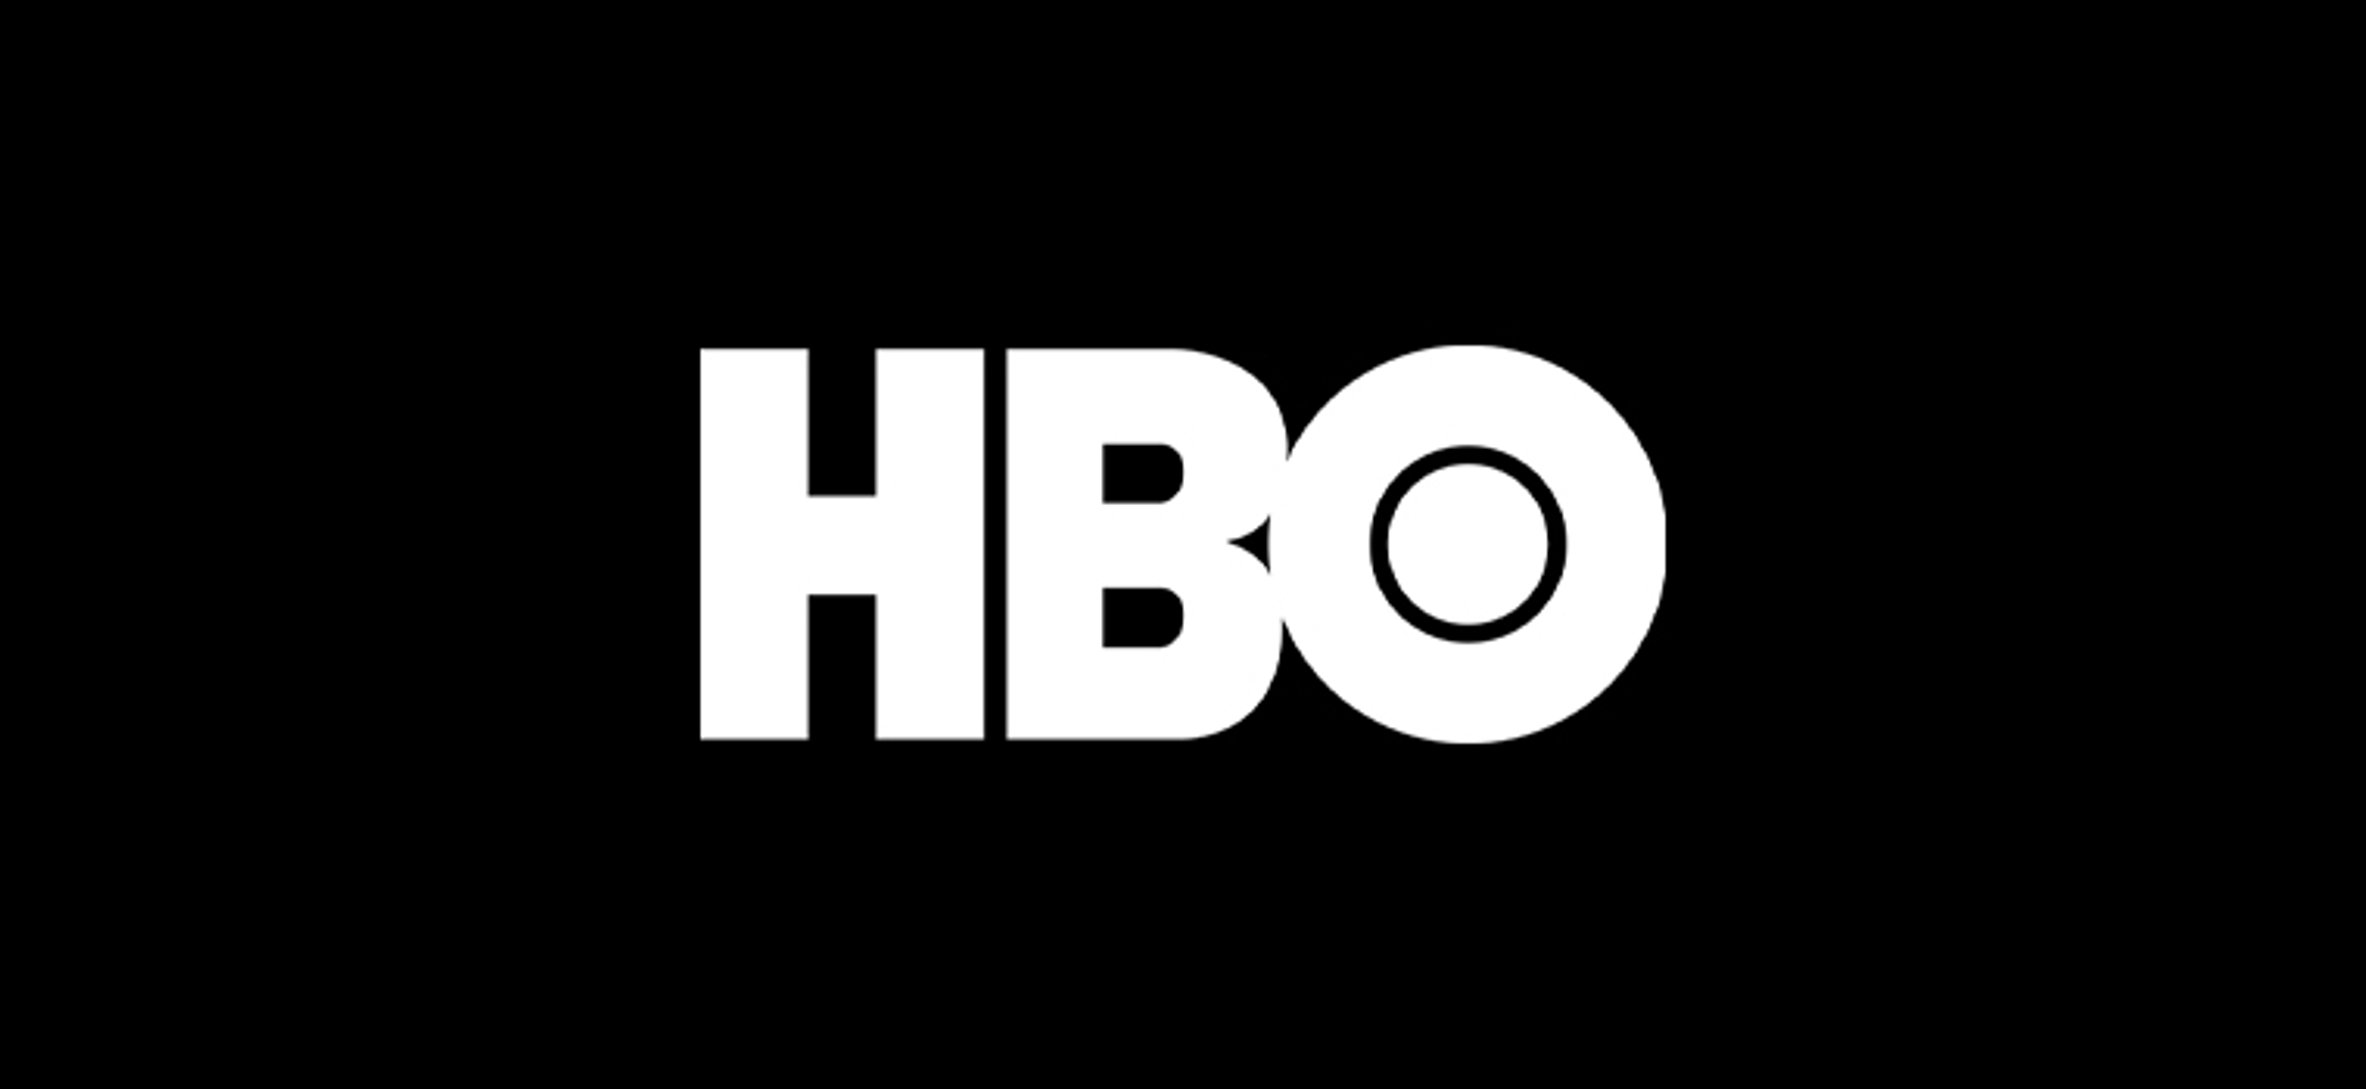 HBO’s new series “Lovecraft Country” produced by Jordan Peele is now casting dancers in Atlanta, Georgia.